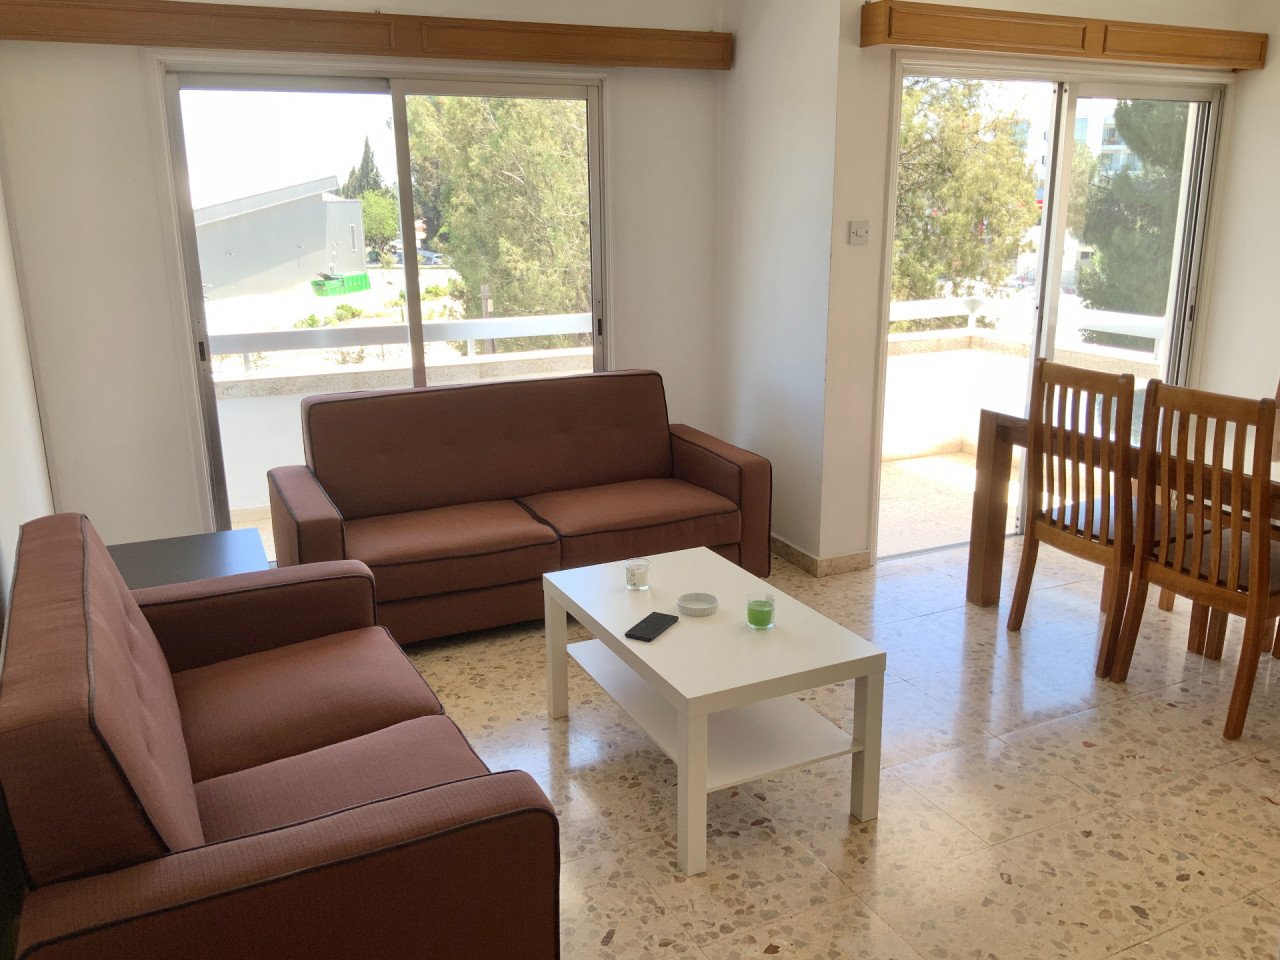 For Sale: Apartment (Flat) in Engomi, Nicosia for Rent | Key Realtor Cyprus